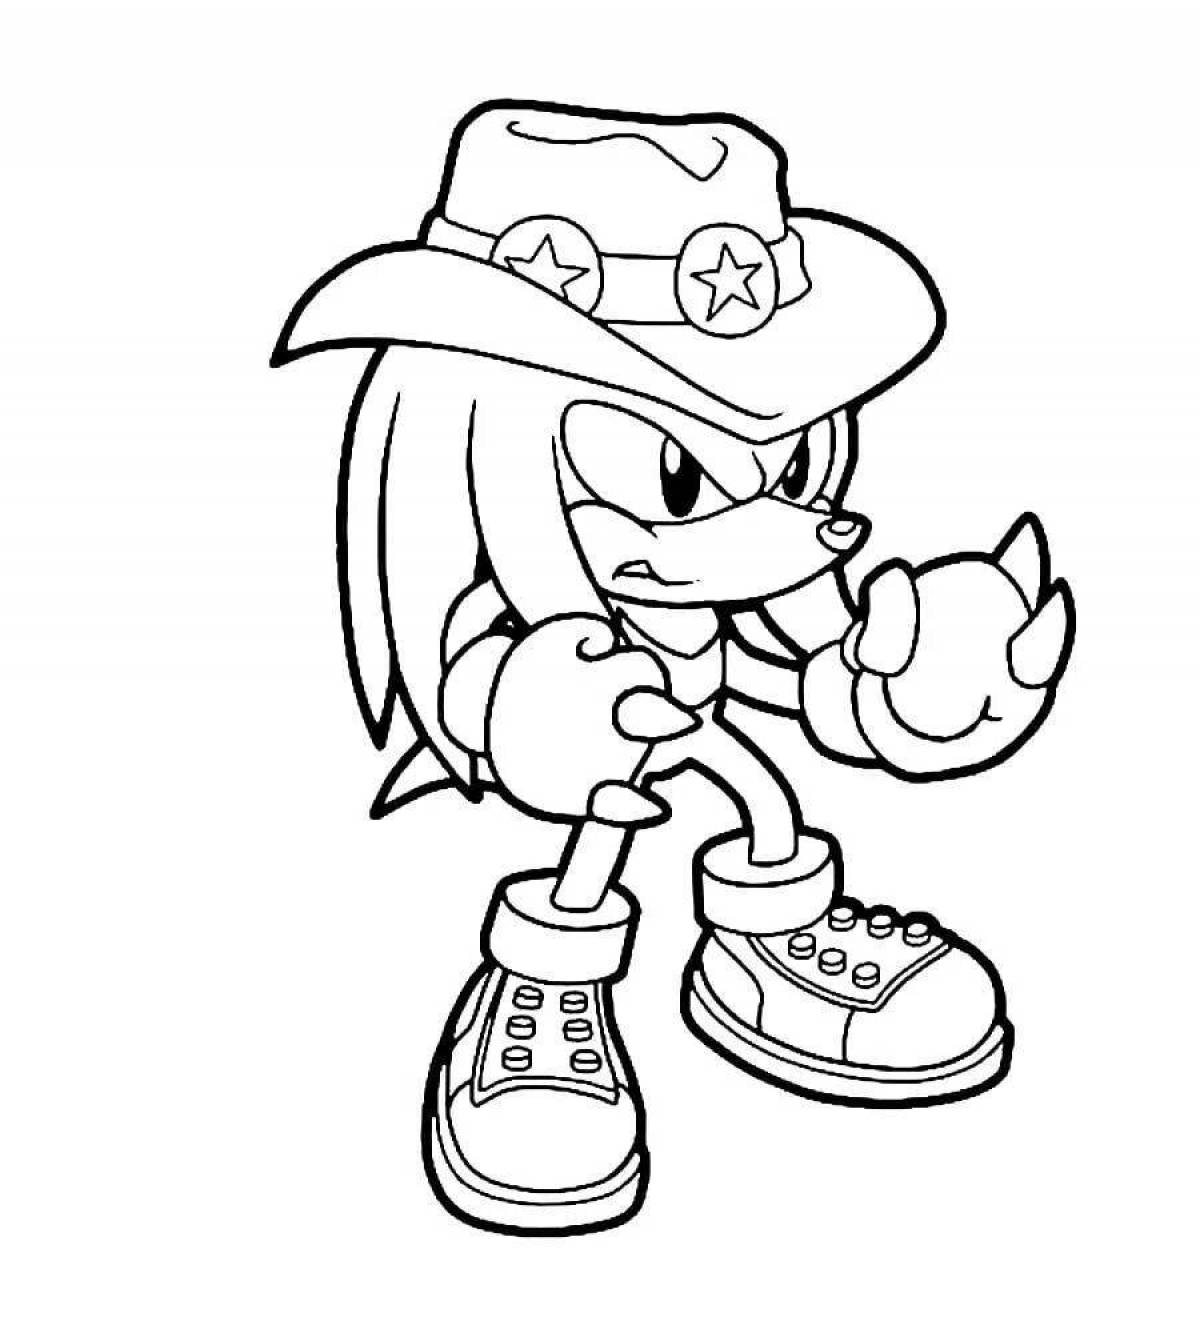 Coloring book playful echidna knuckles